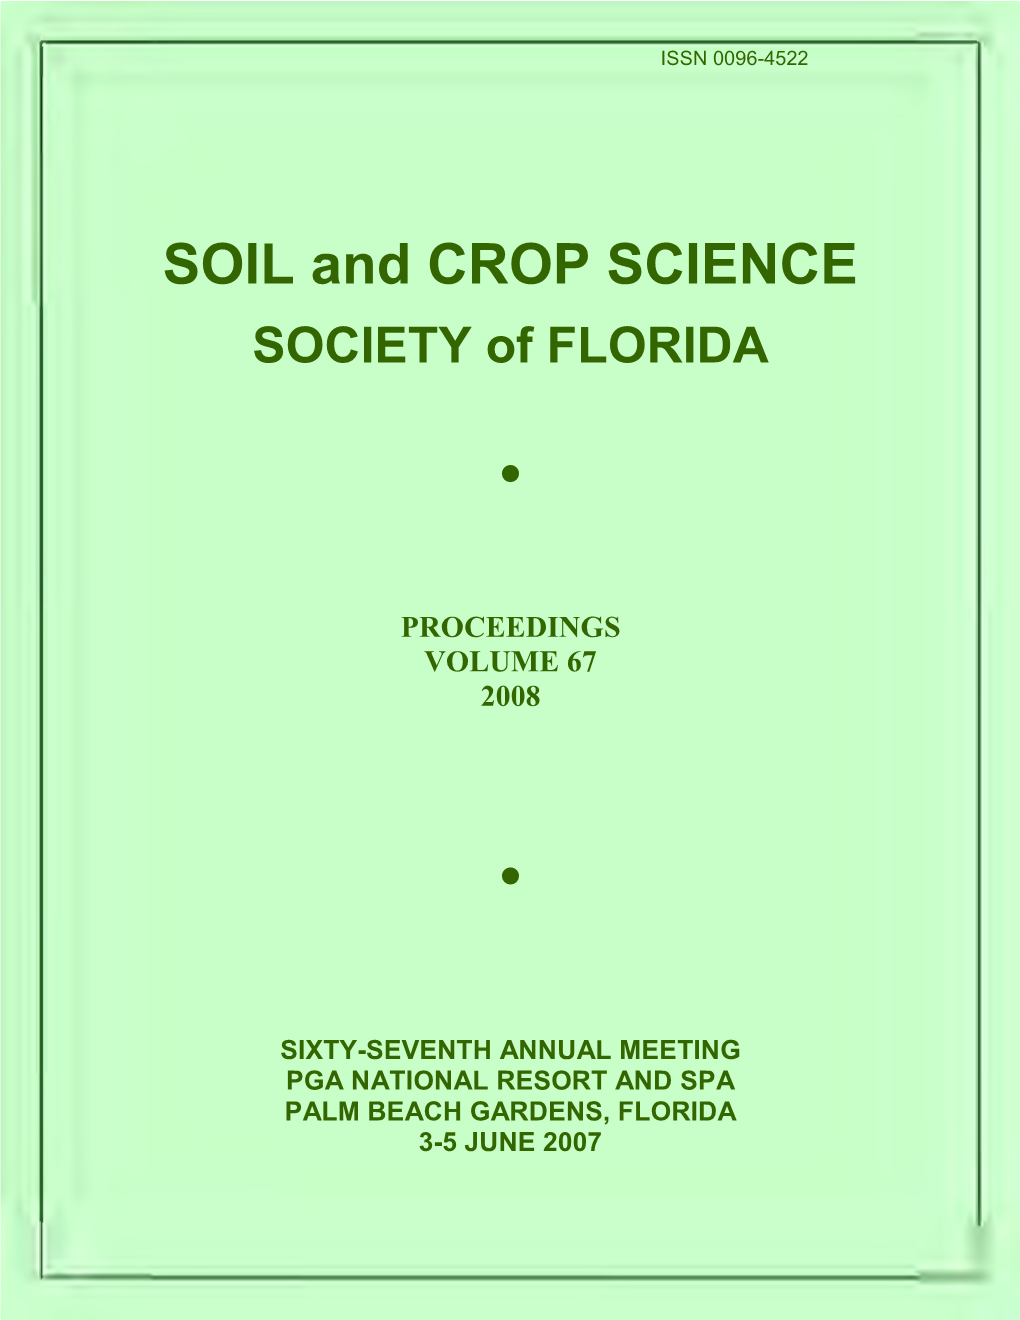 SOIL and CROP SCIENCE SOCIETY of FLORIDA